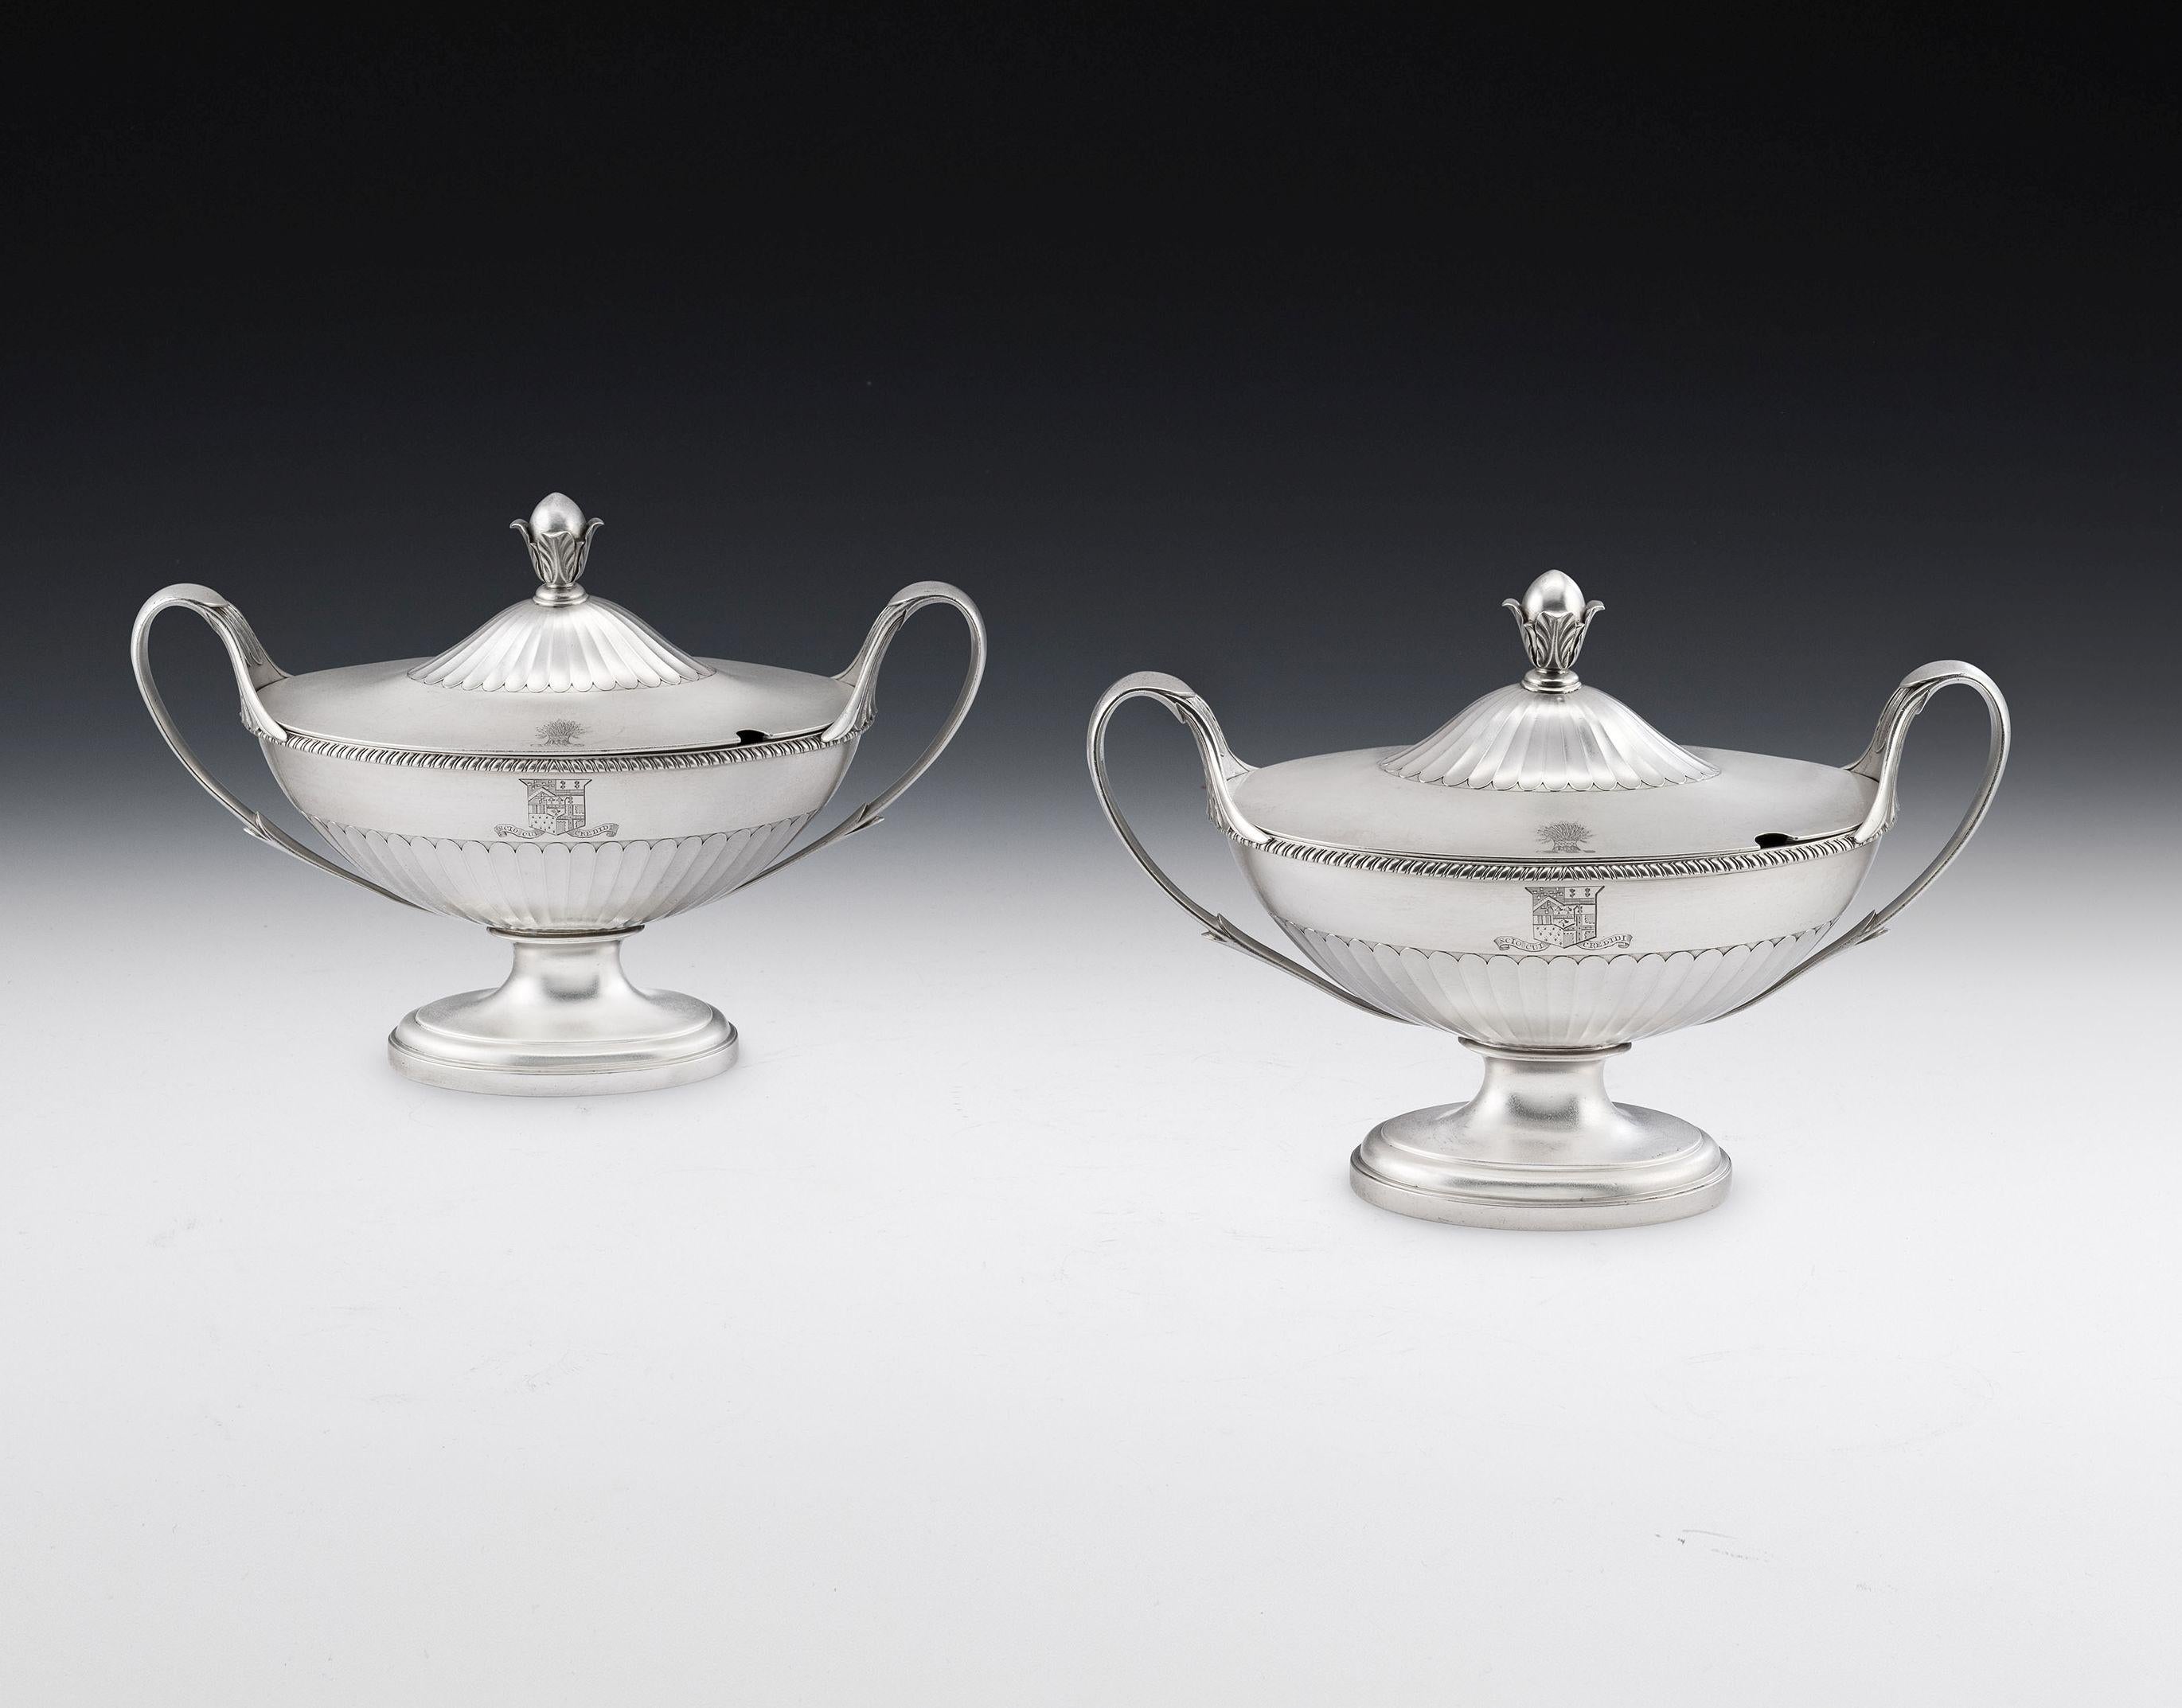 These exceptional antique sterling silver Sauce Tureens are boat shaped in form and stand on an oval pedestal foot decorated with reeding. The lower section of the main body is decorated with flat fluting and the rim with gadrooning. Each piece has